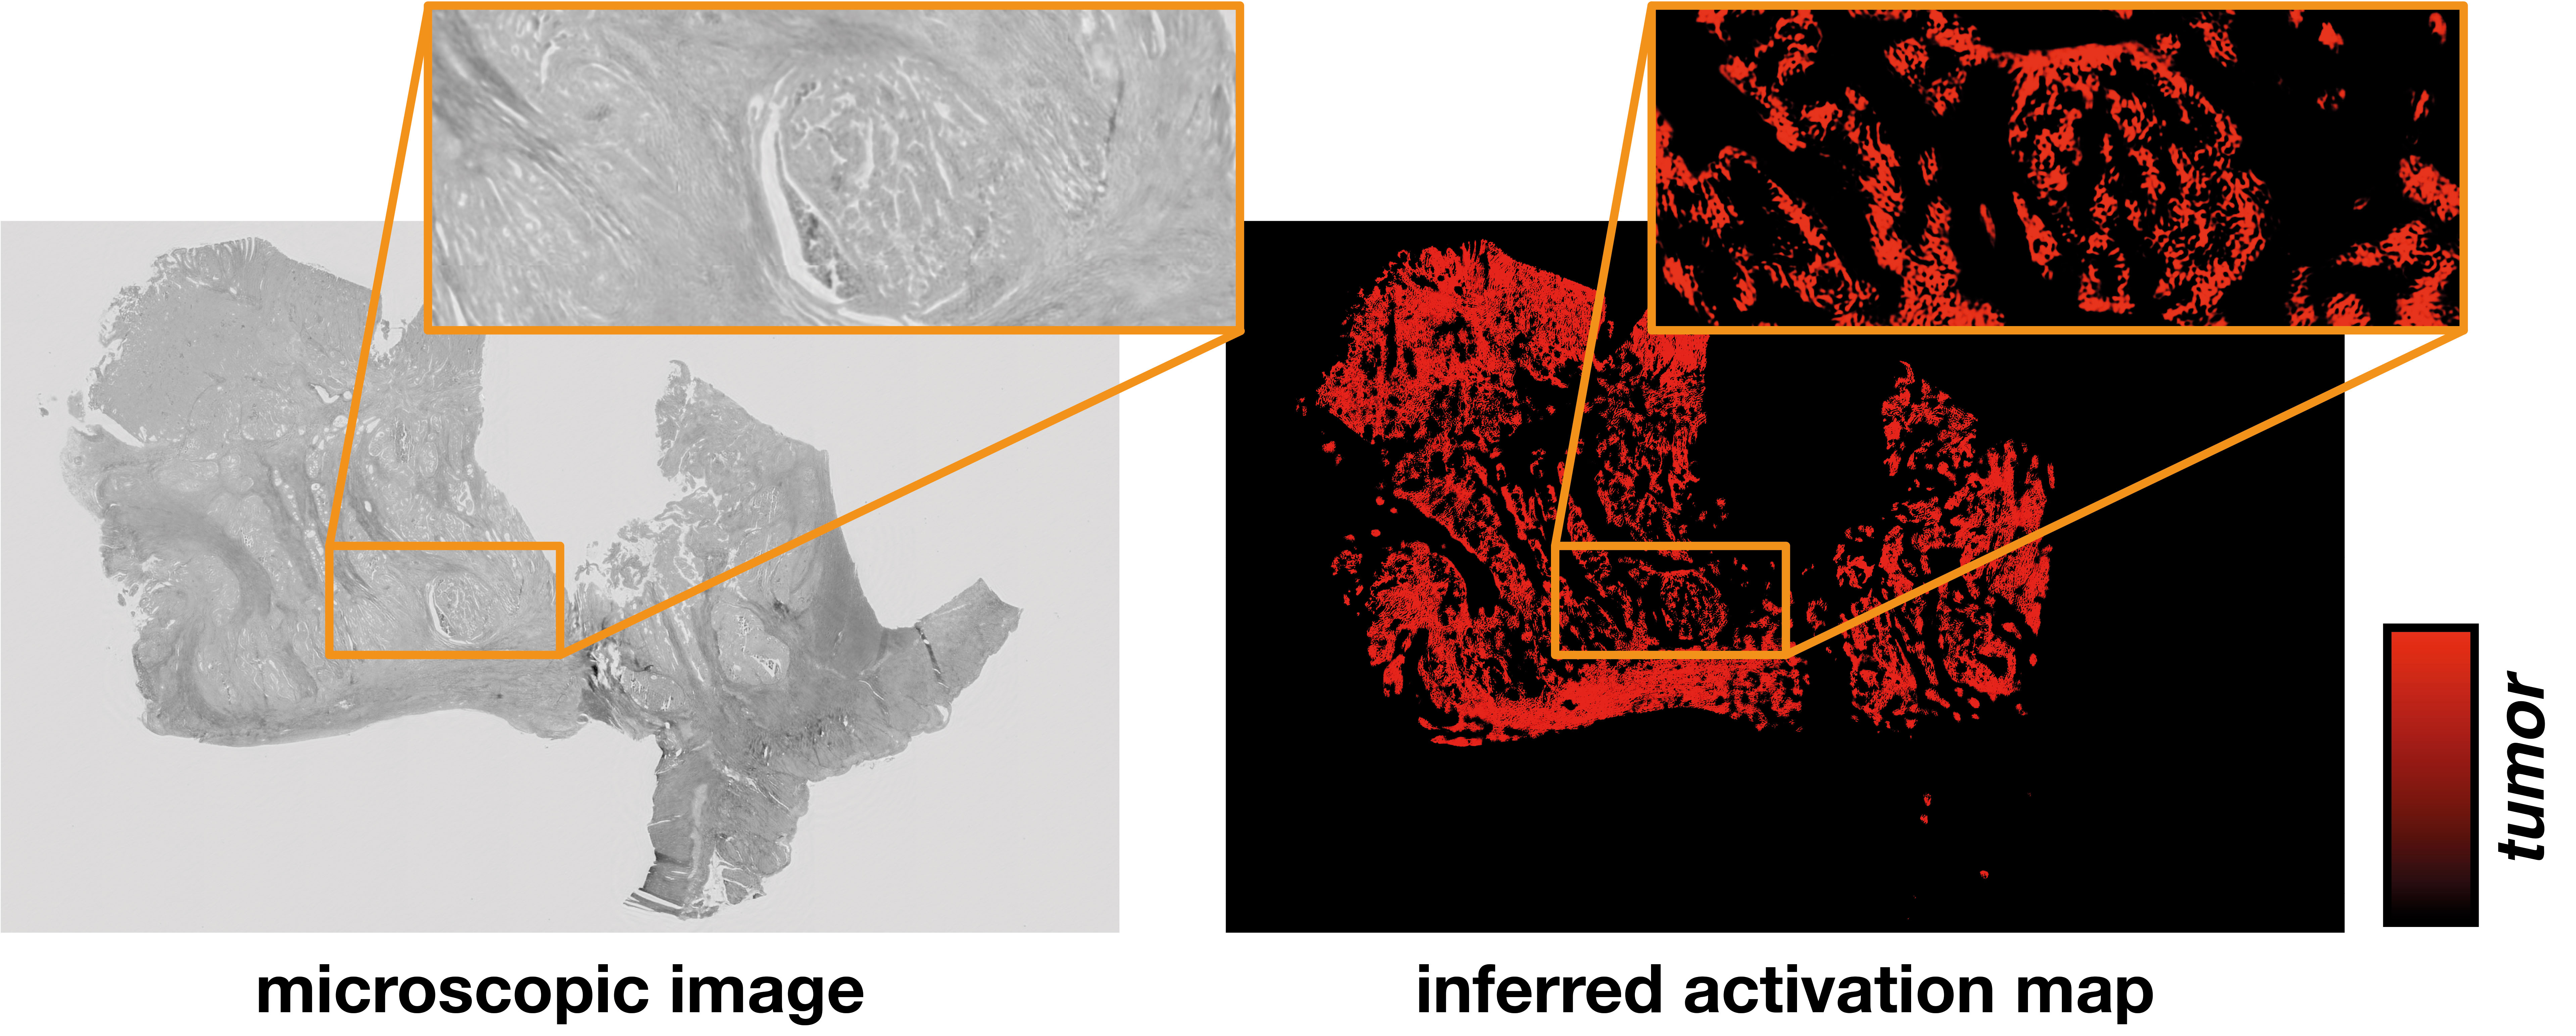 neural network derived activation map (on the right) from the microscopic image of a tissue sample (on the left)